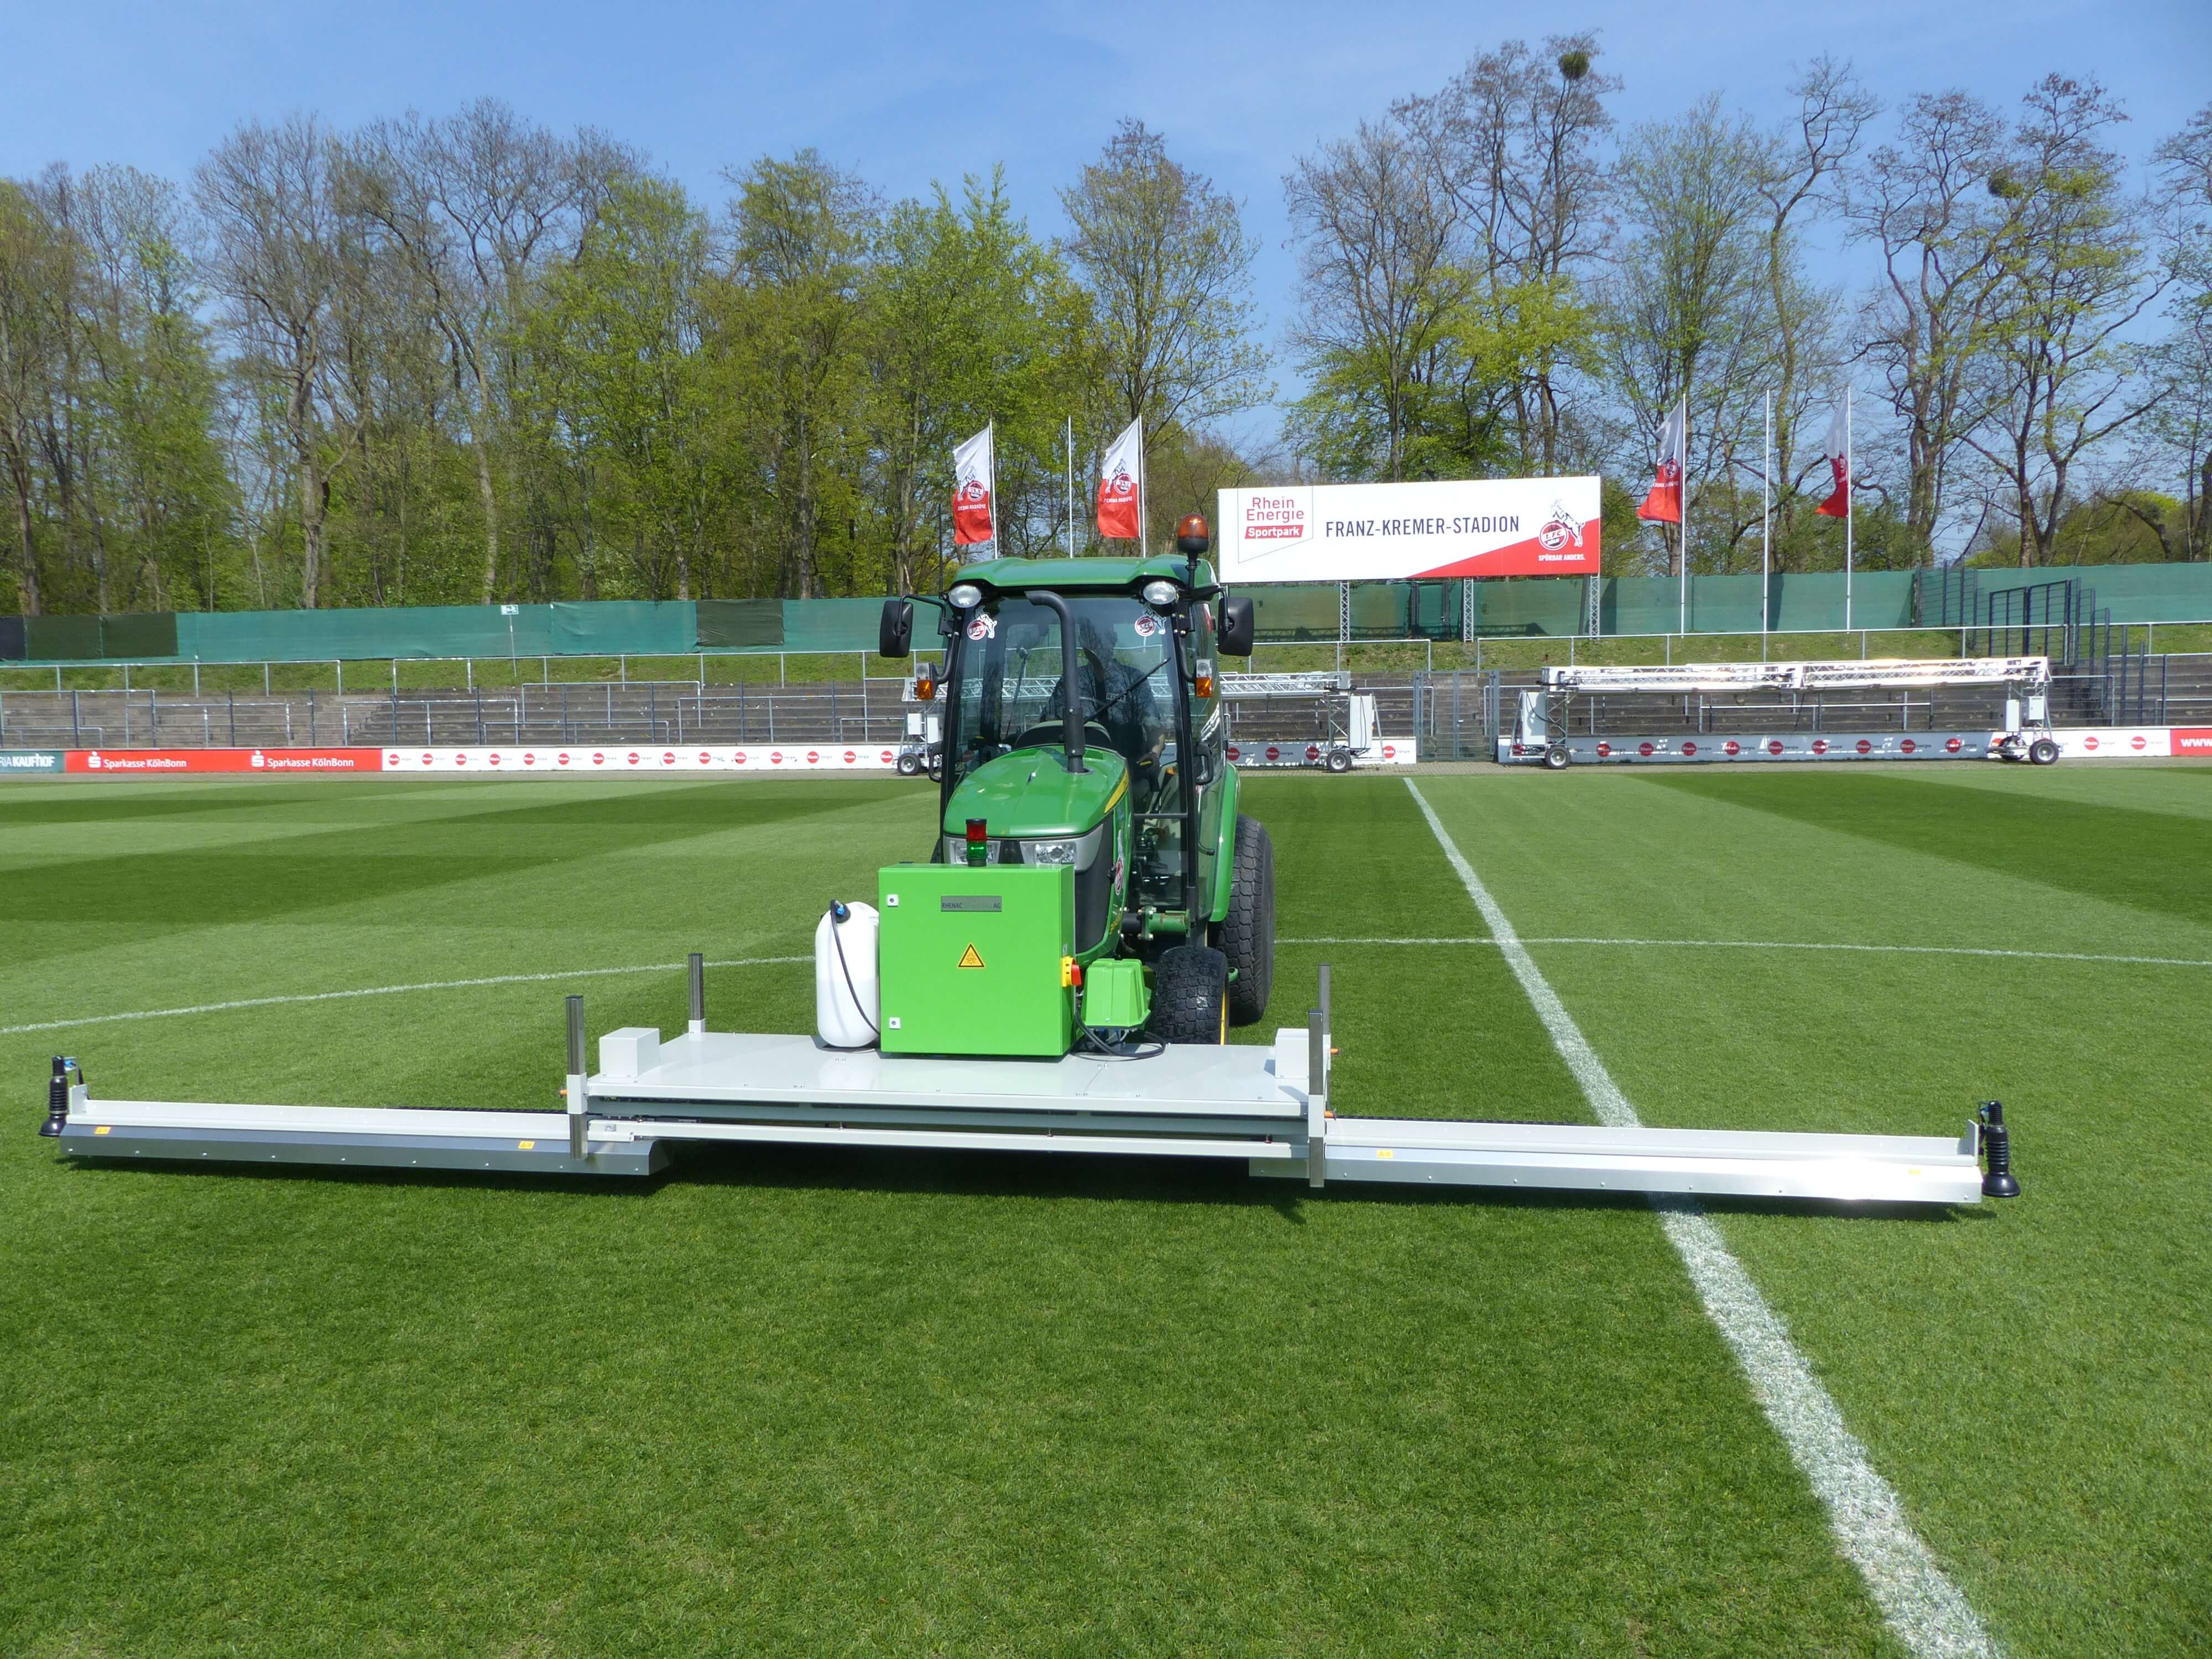 RSI UV-C Technology Shows That the Environment Comes First at 1. FC Köln